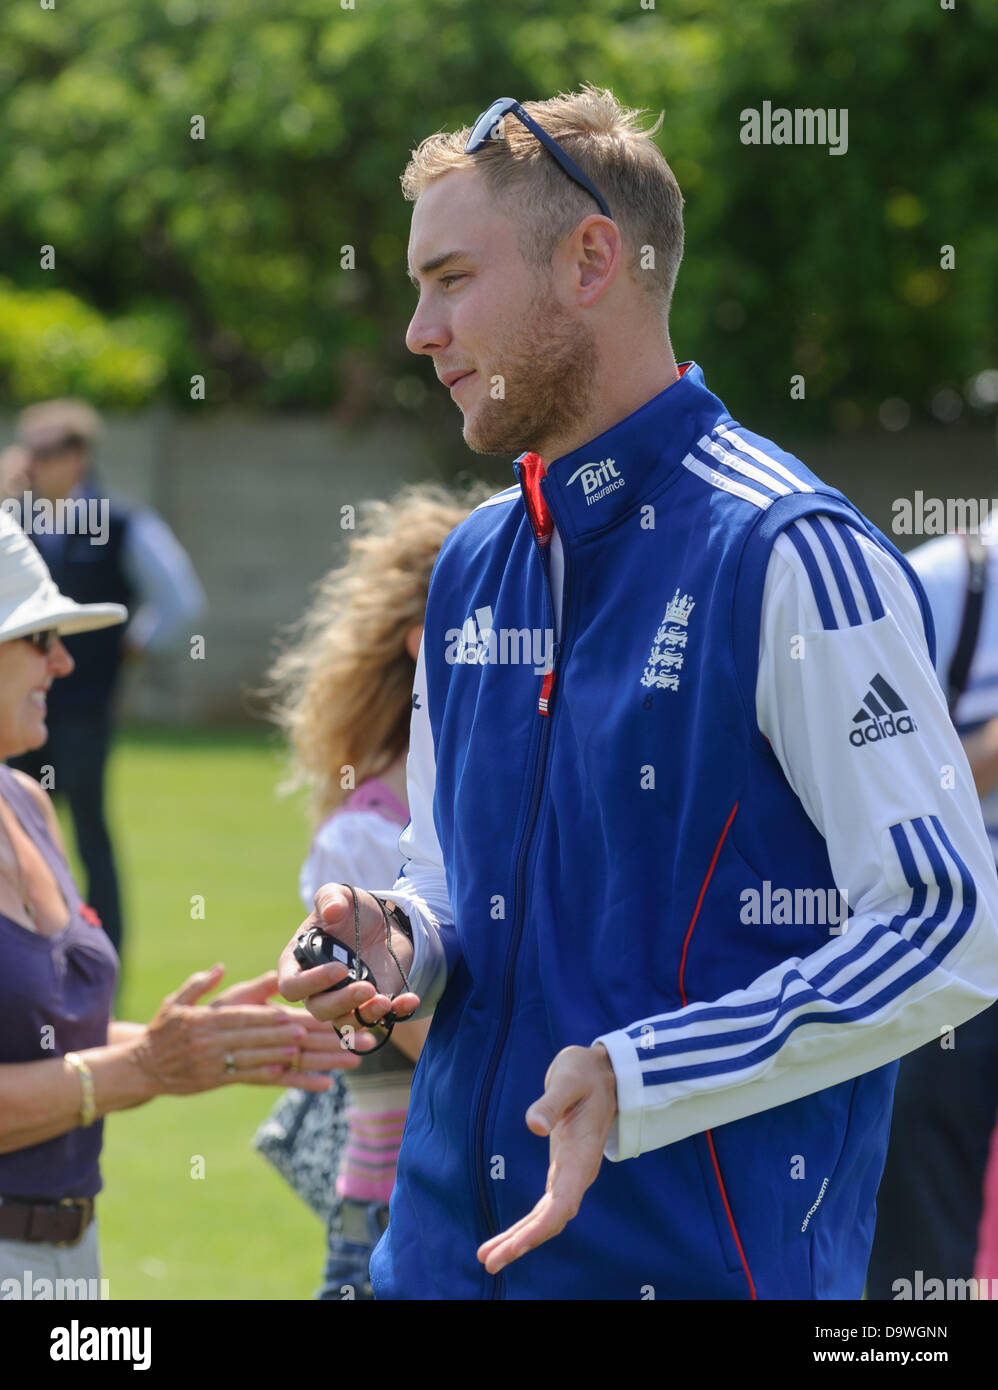 Brook Priory School, Oakham. Ex-Pupil and England cricketer Stuart Broad  returned to his old school for their Sports Day. He signed autographs and spent time chatting to some of his old teachers before helping to time runners in some of the races. 26th June 2013. Stock Photo